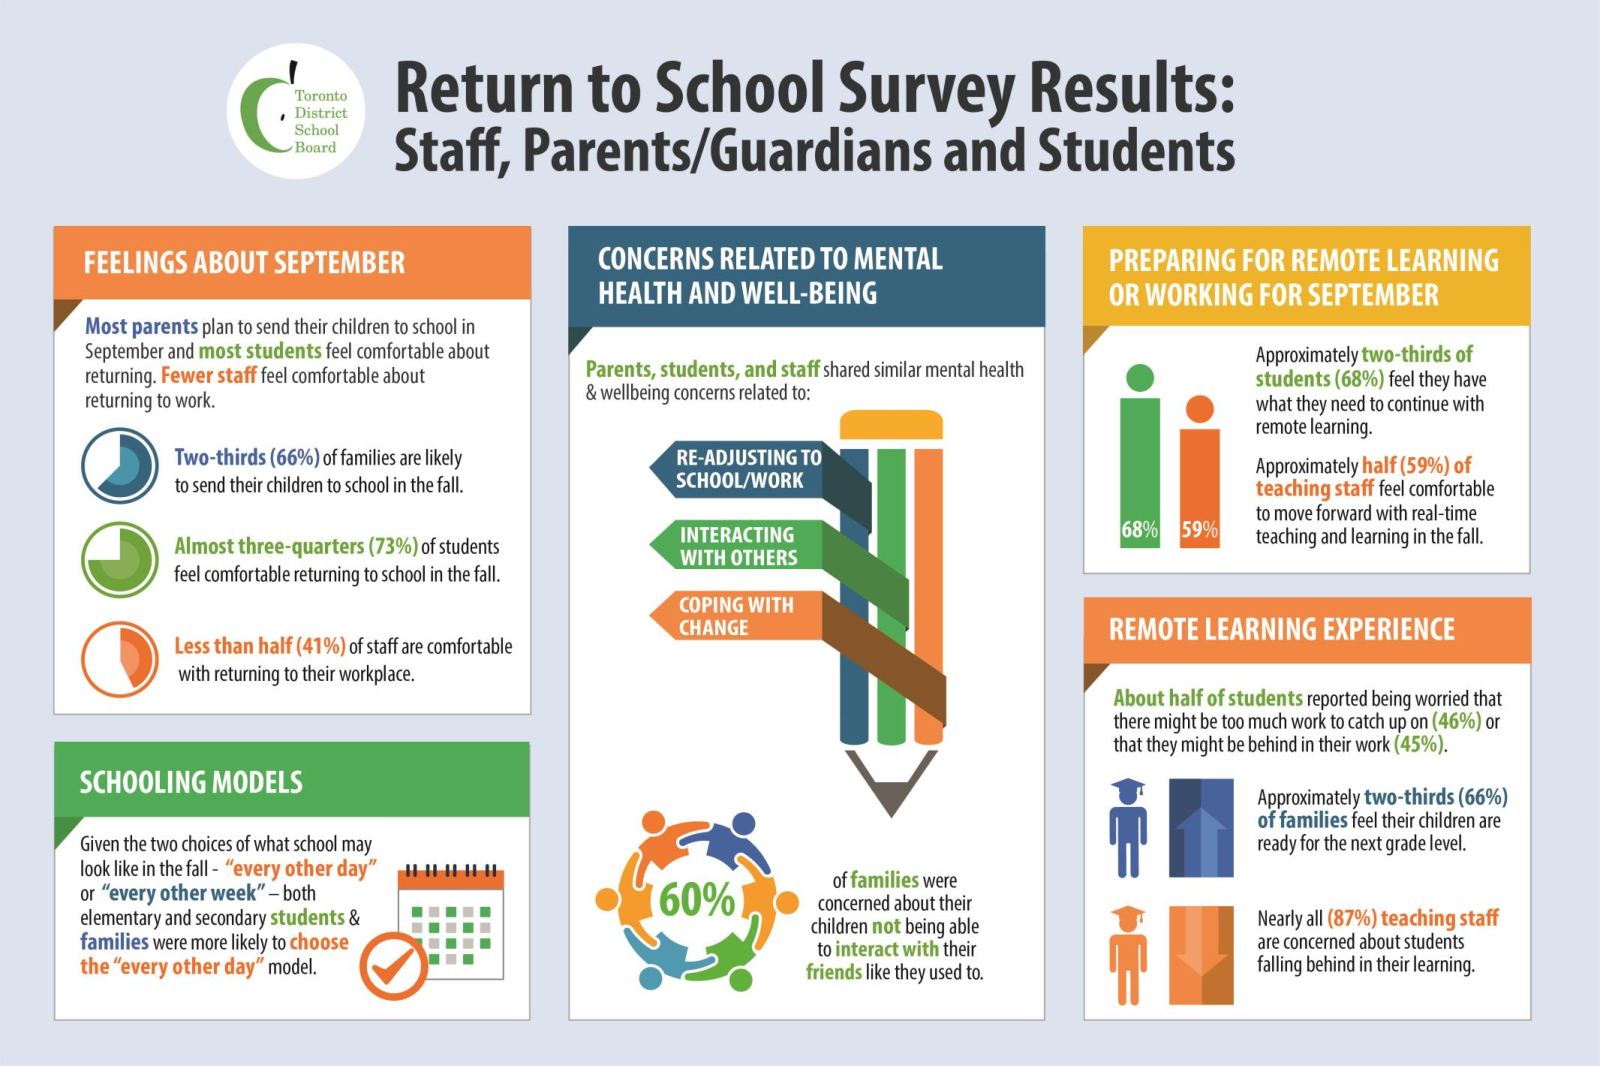 Return to school survey results include, most parents plan to send their children to school in September (66%) and most students feel comfortable about returning (73%), fewer staff feel comfortable about returning to work (41%)